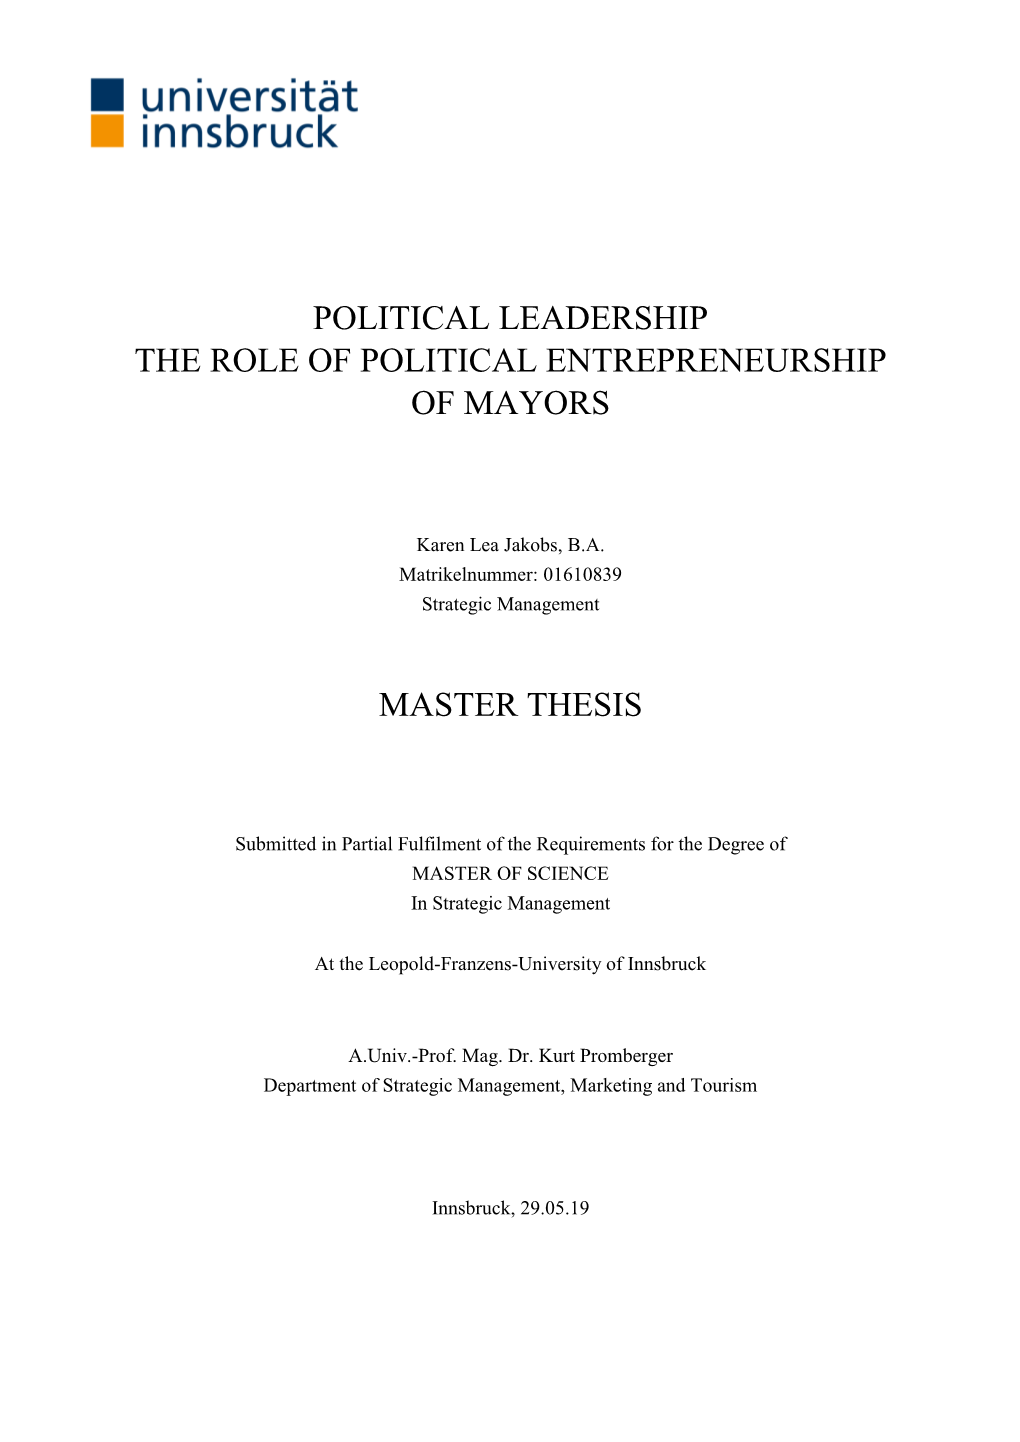 Political Leadership the Role of Political Entrepreneurship of Mayors